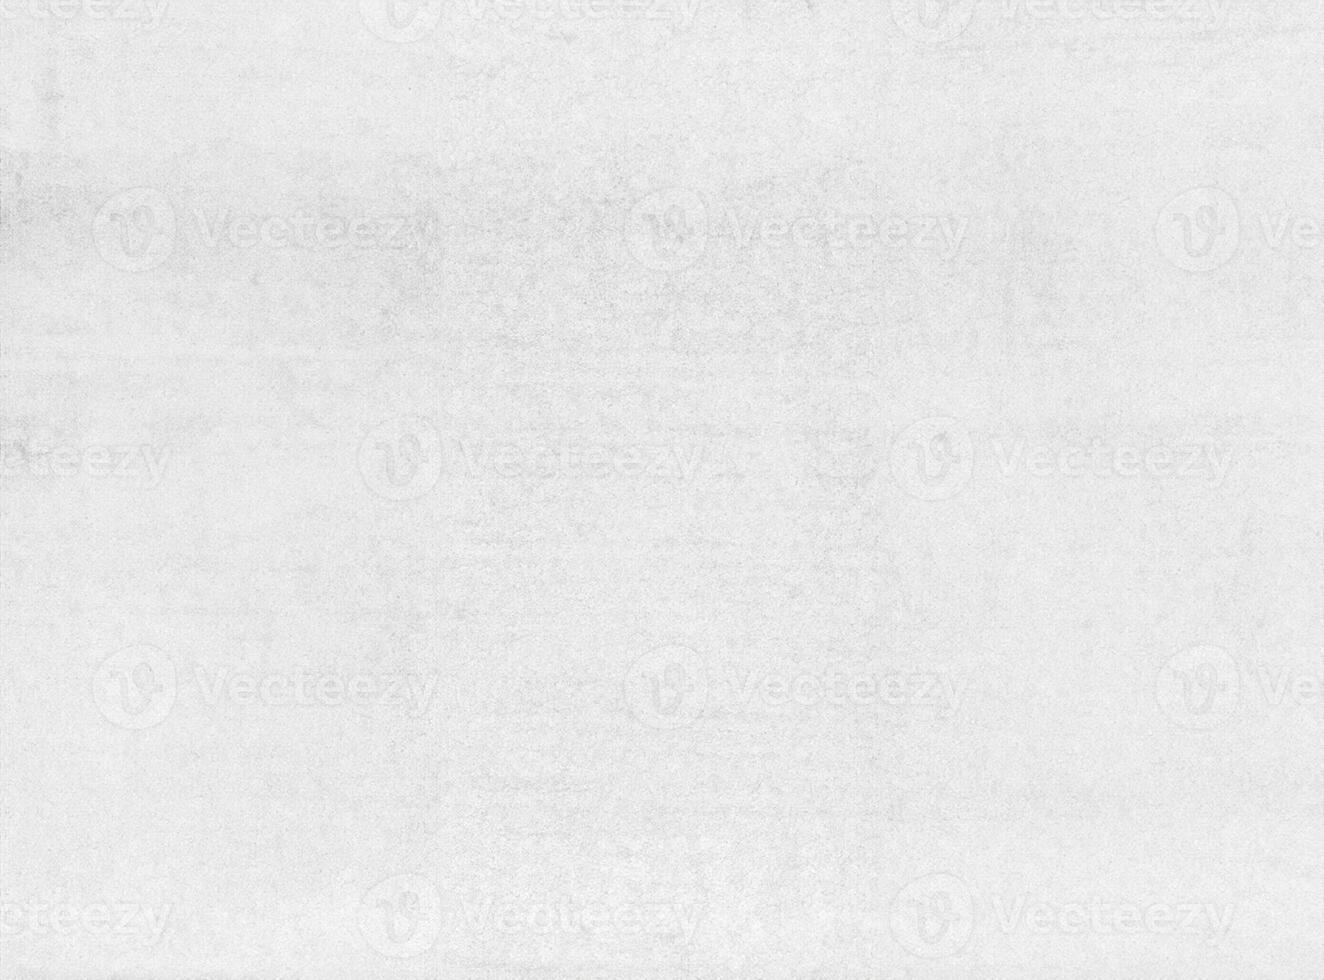 Vintage Gray Paper Texture, Aged Photocopy Background. photo